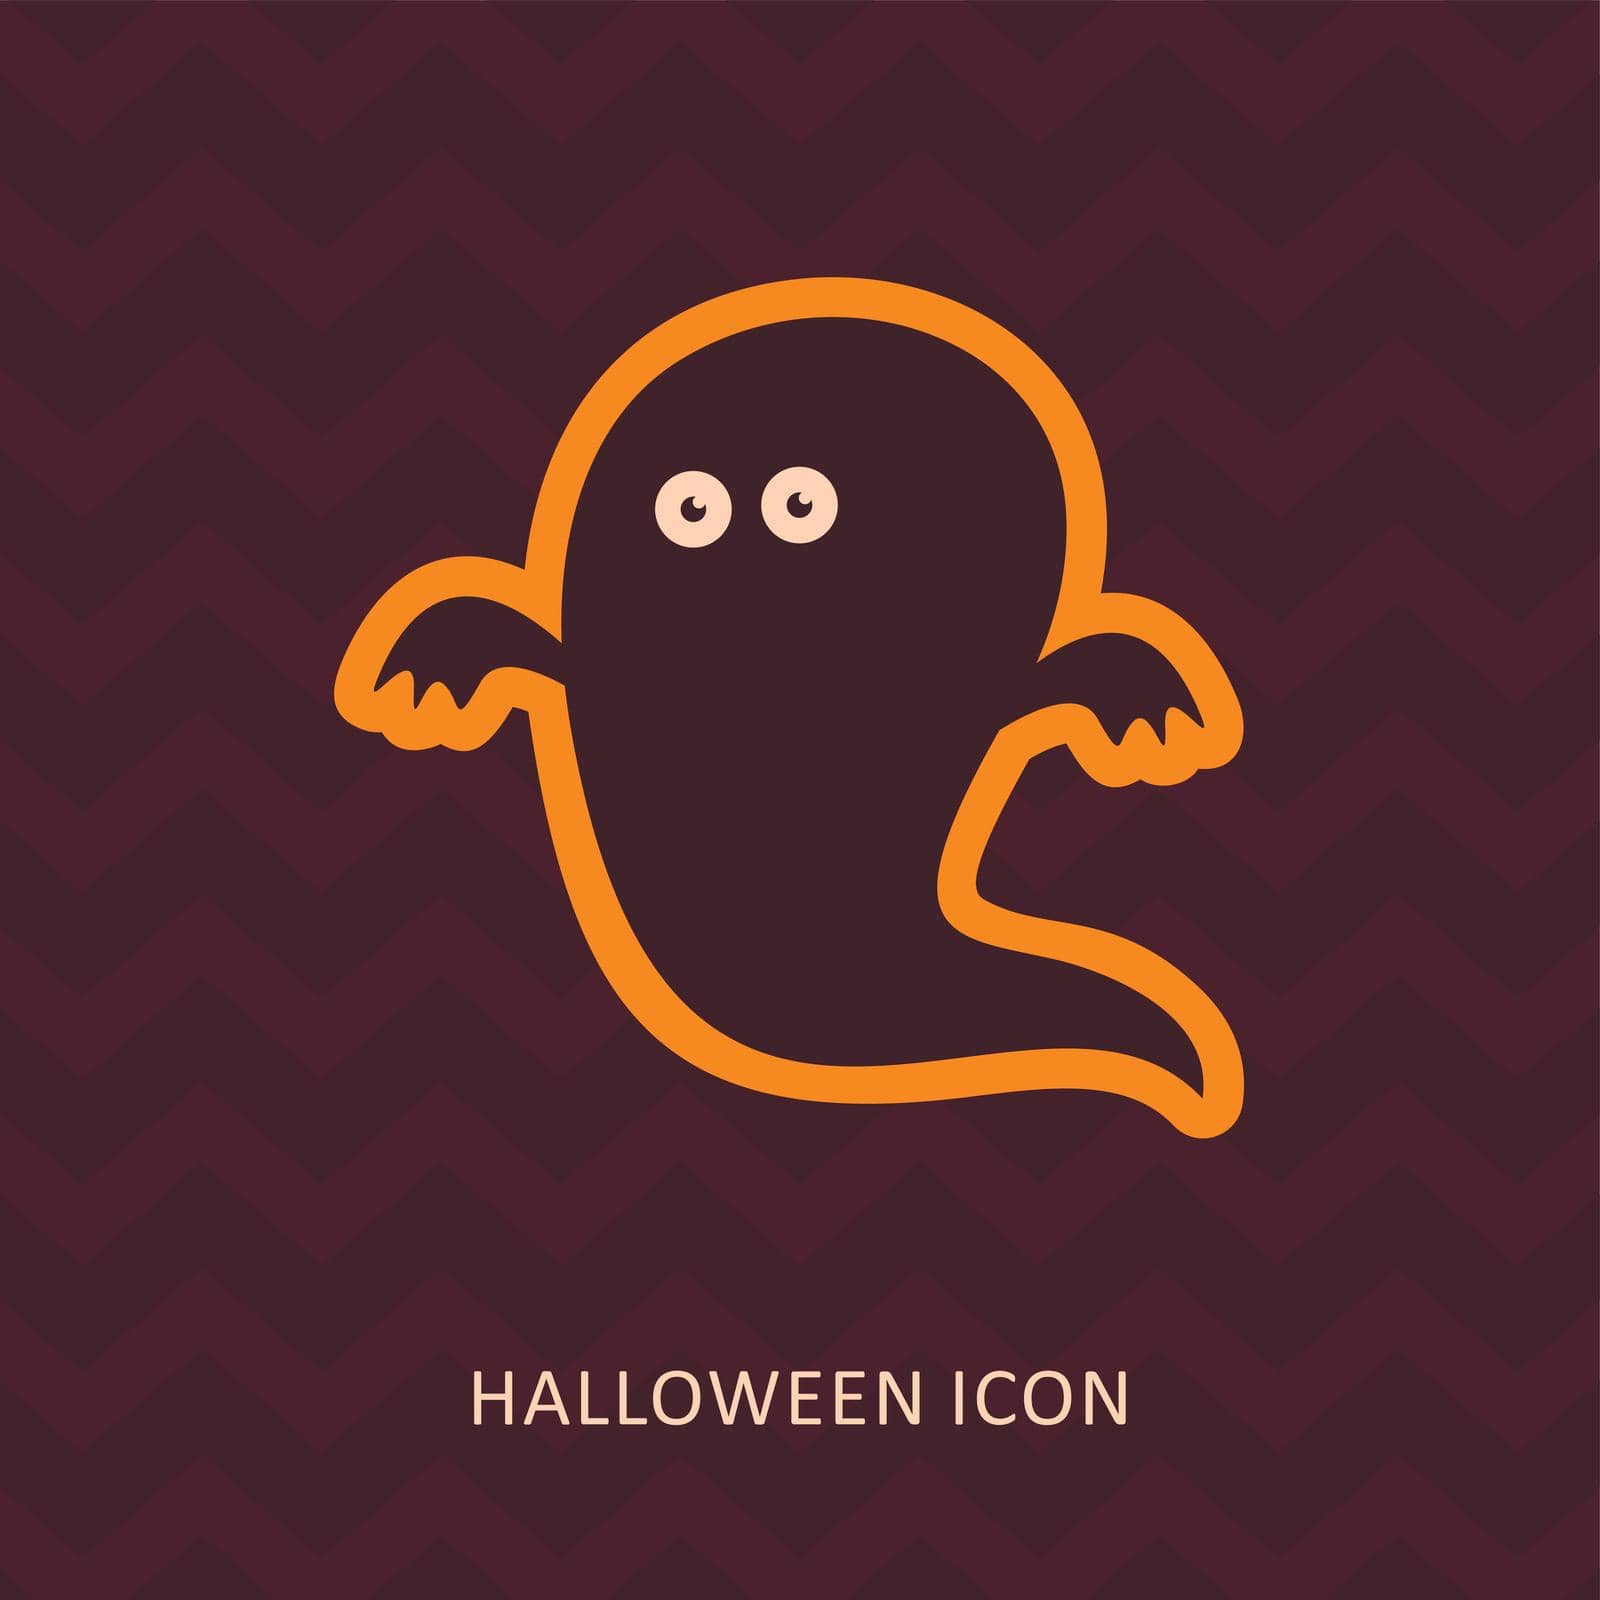 Halloween Ghost vector silhouette icon, eps 10